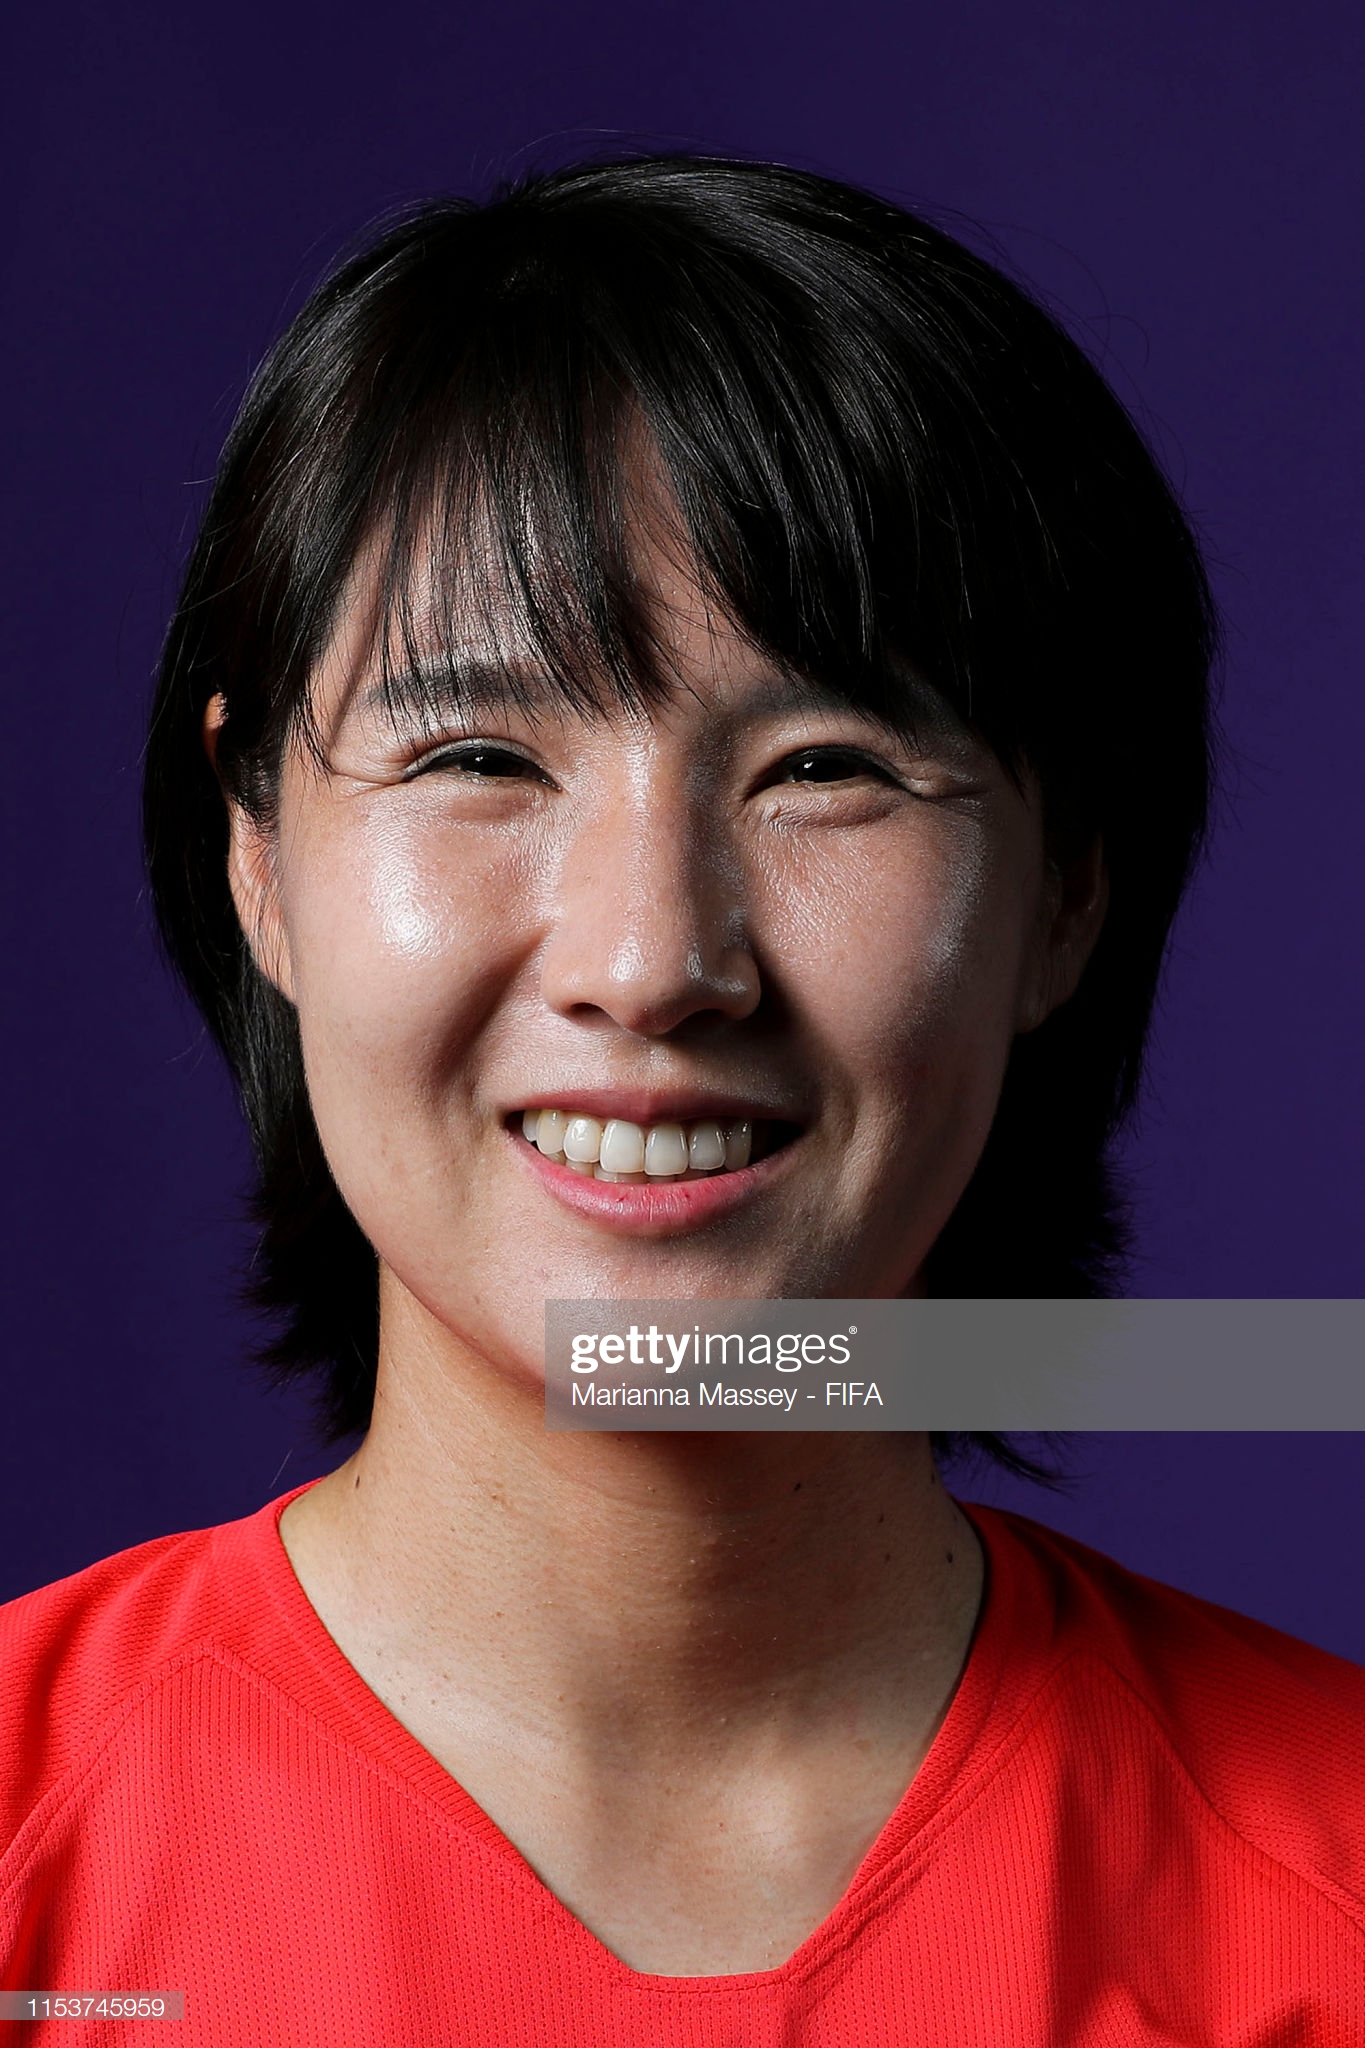 gettyimages-1153745959-2048x2048.jpg